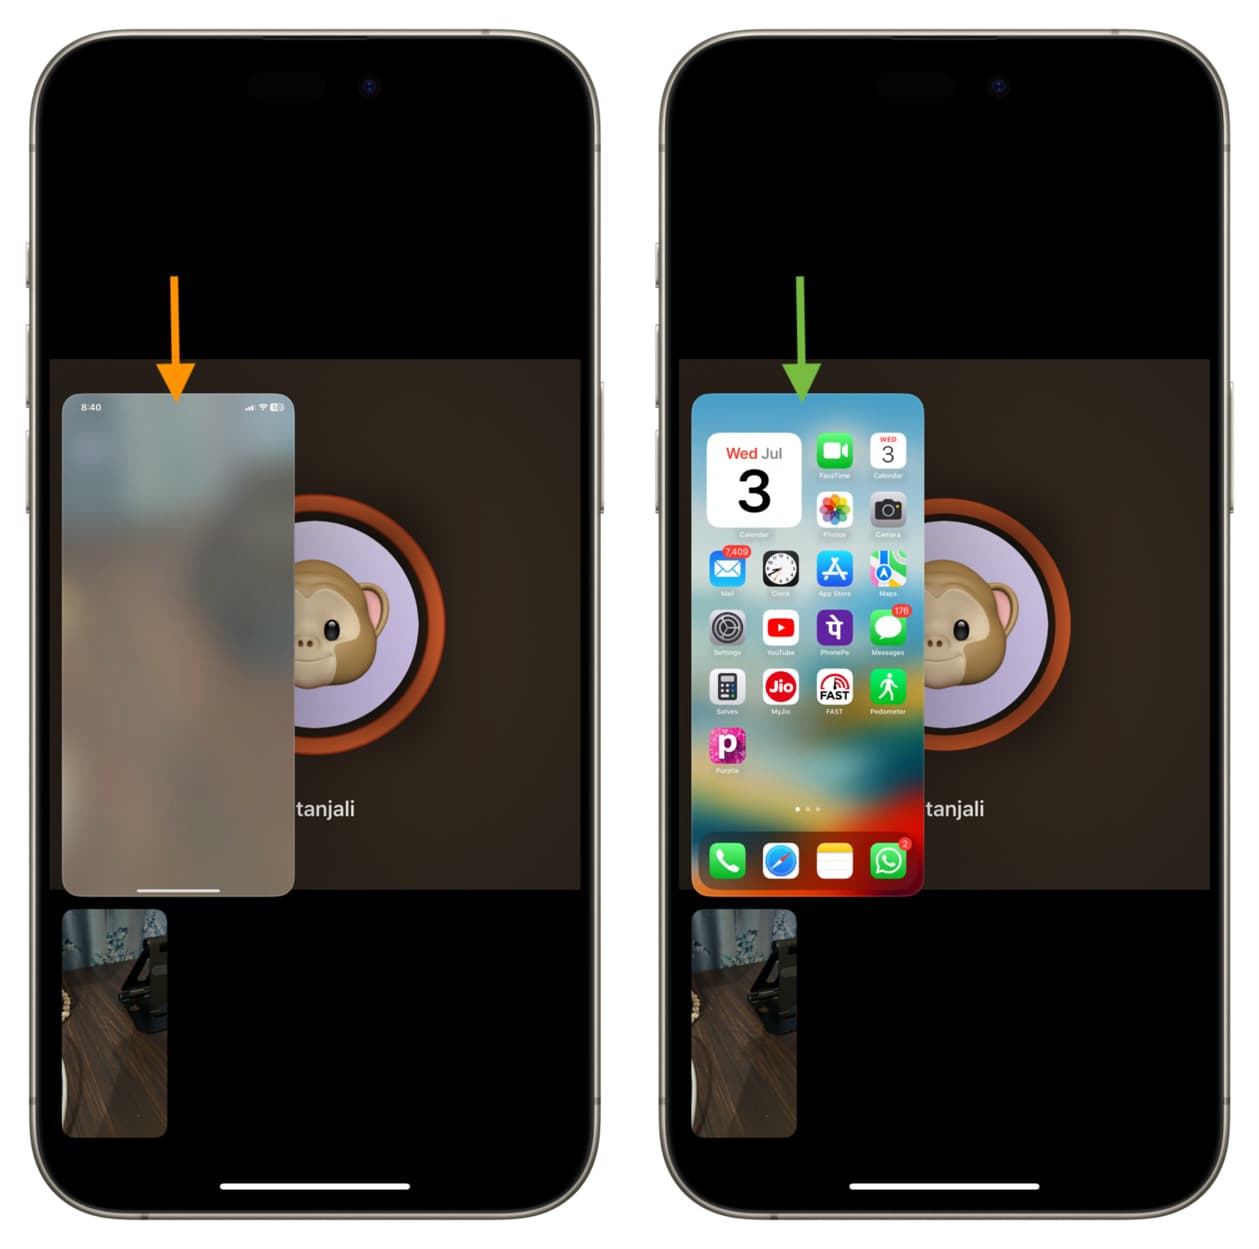 Blurred and clear screen sharing during FaceTime on iPhone